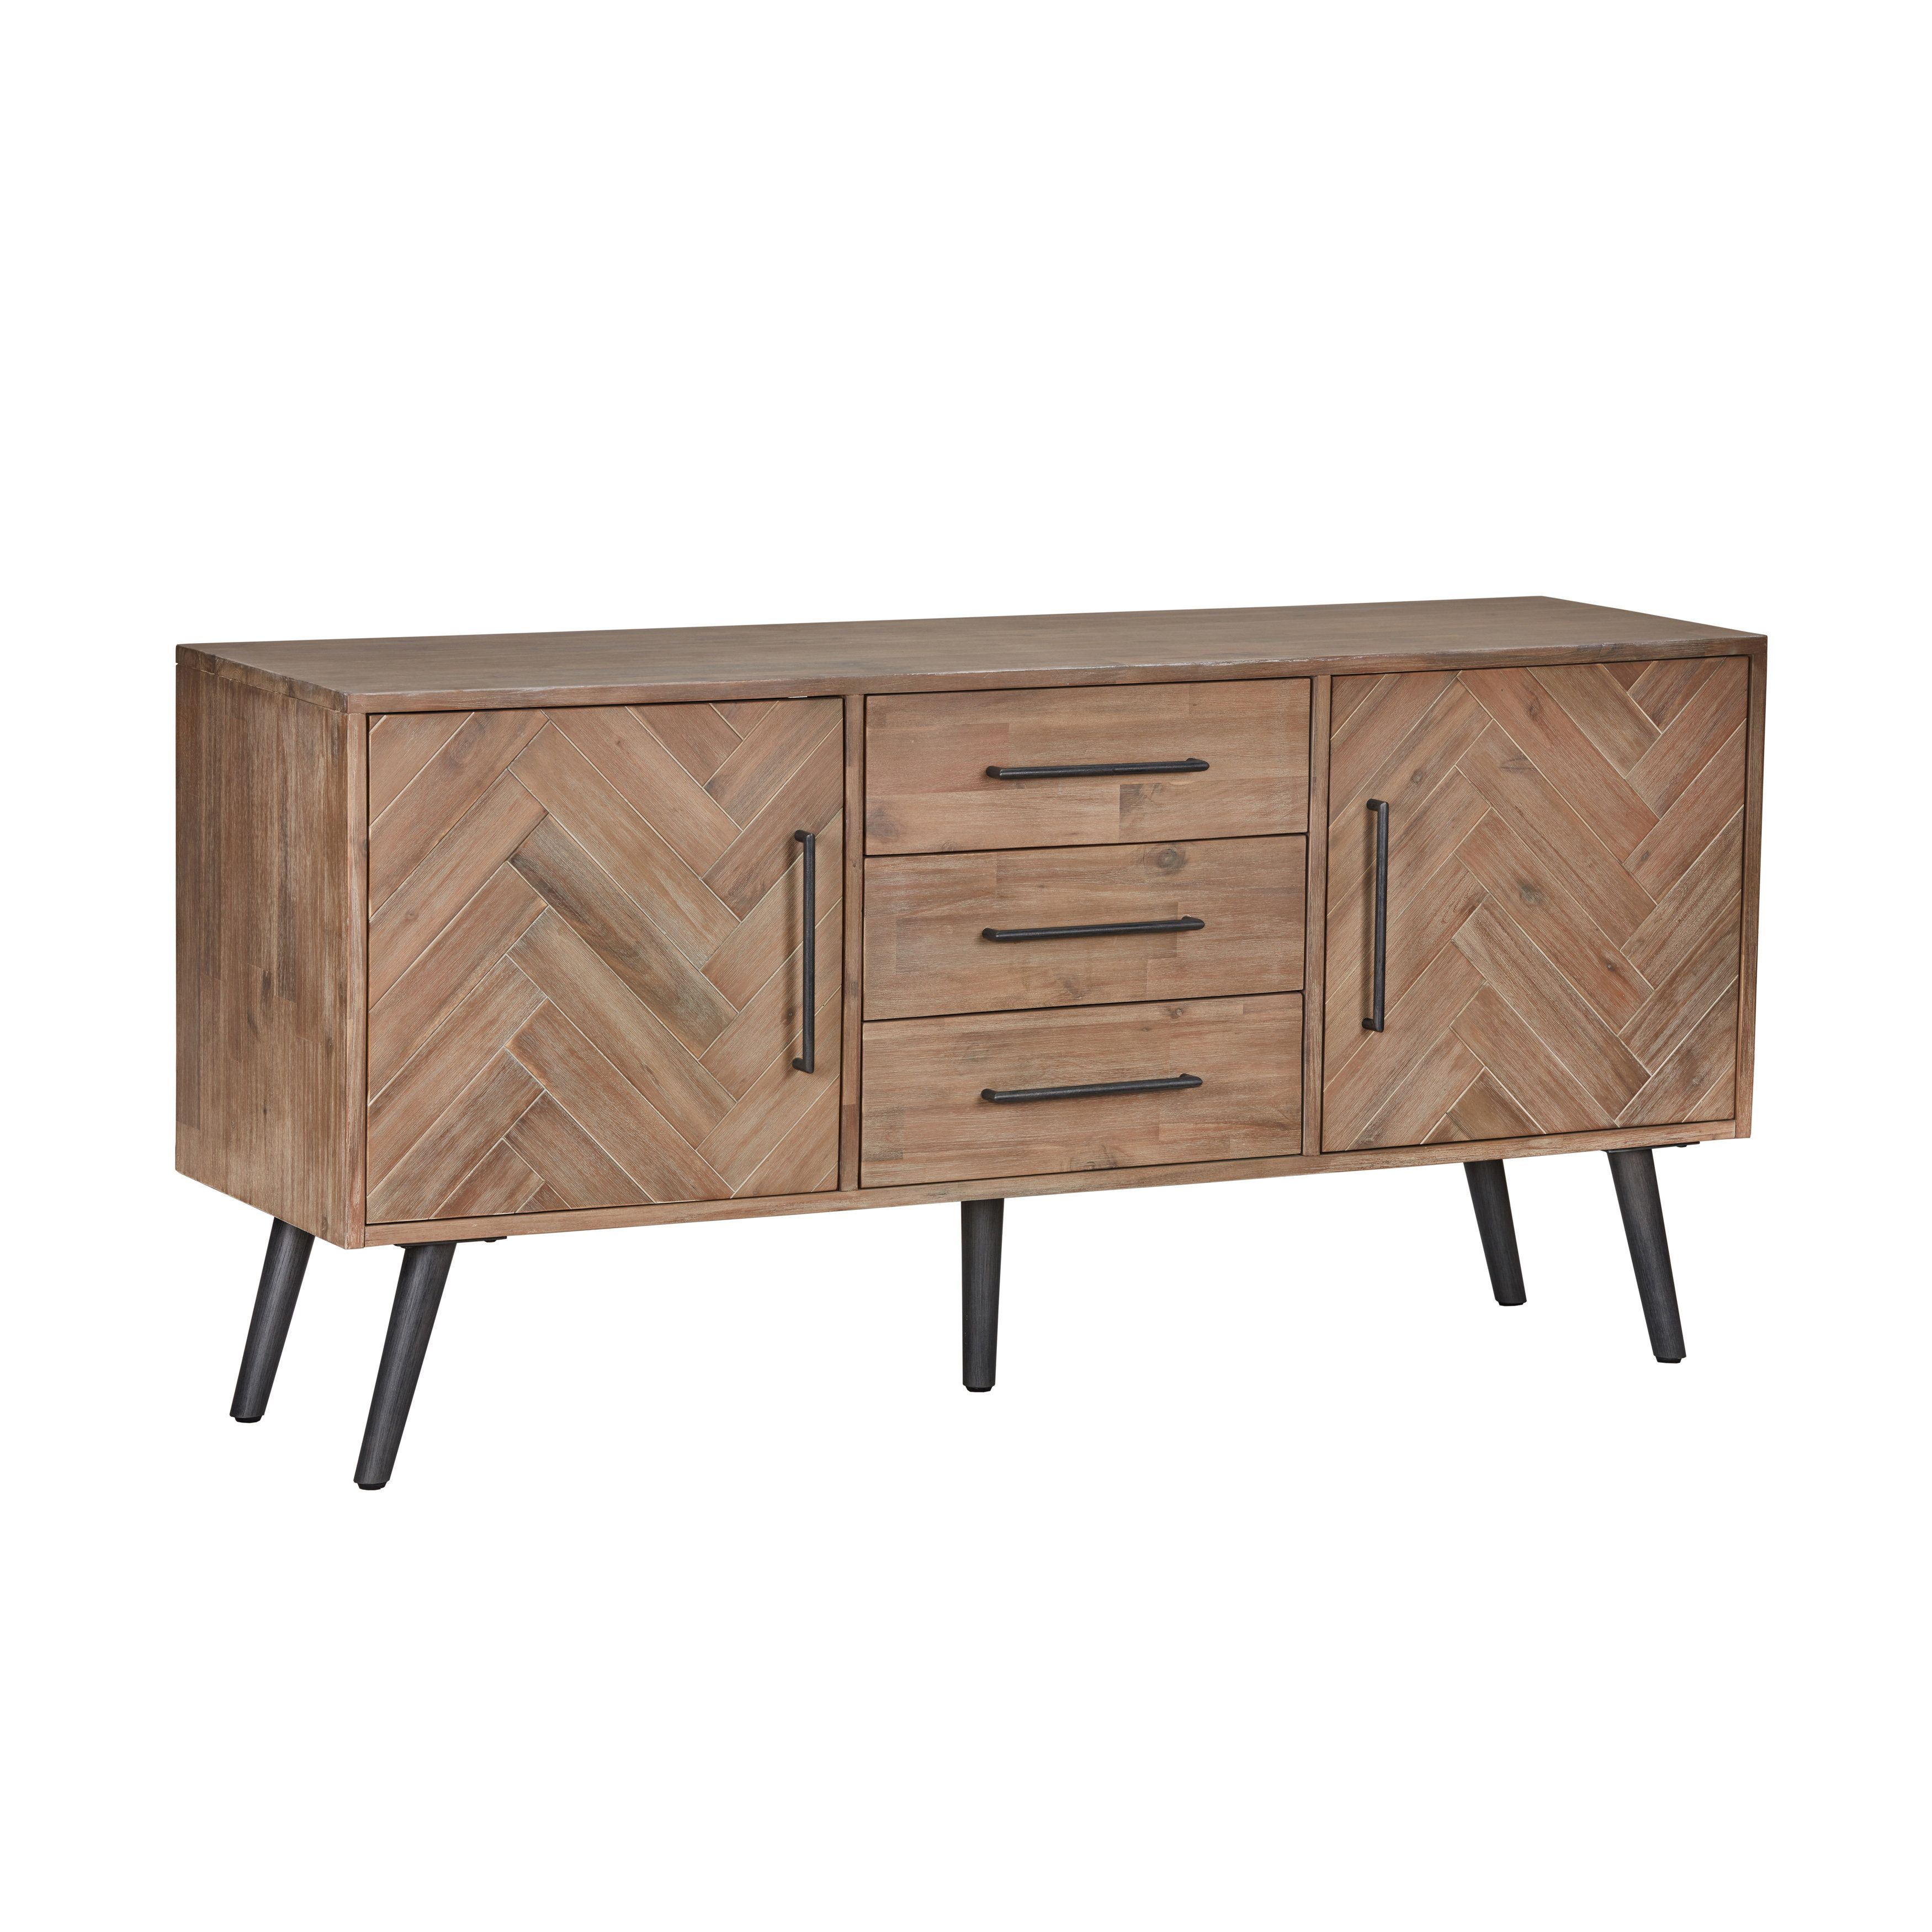 Extra Long Credenza You'll Love In 2019 | Wayfair Inside Barr Credenzas (View 3 of 30)